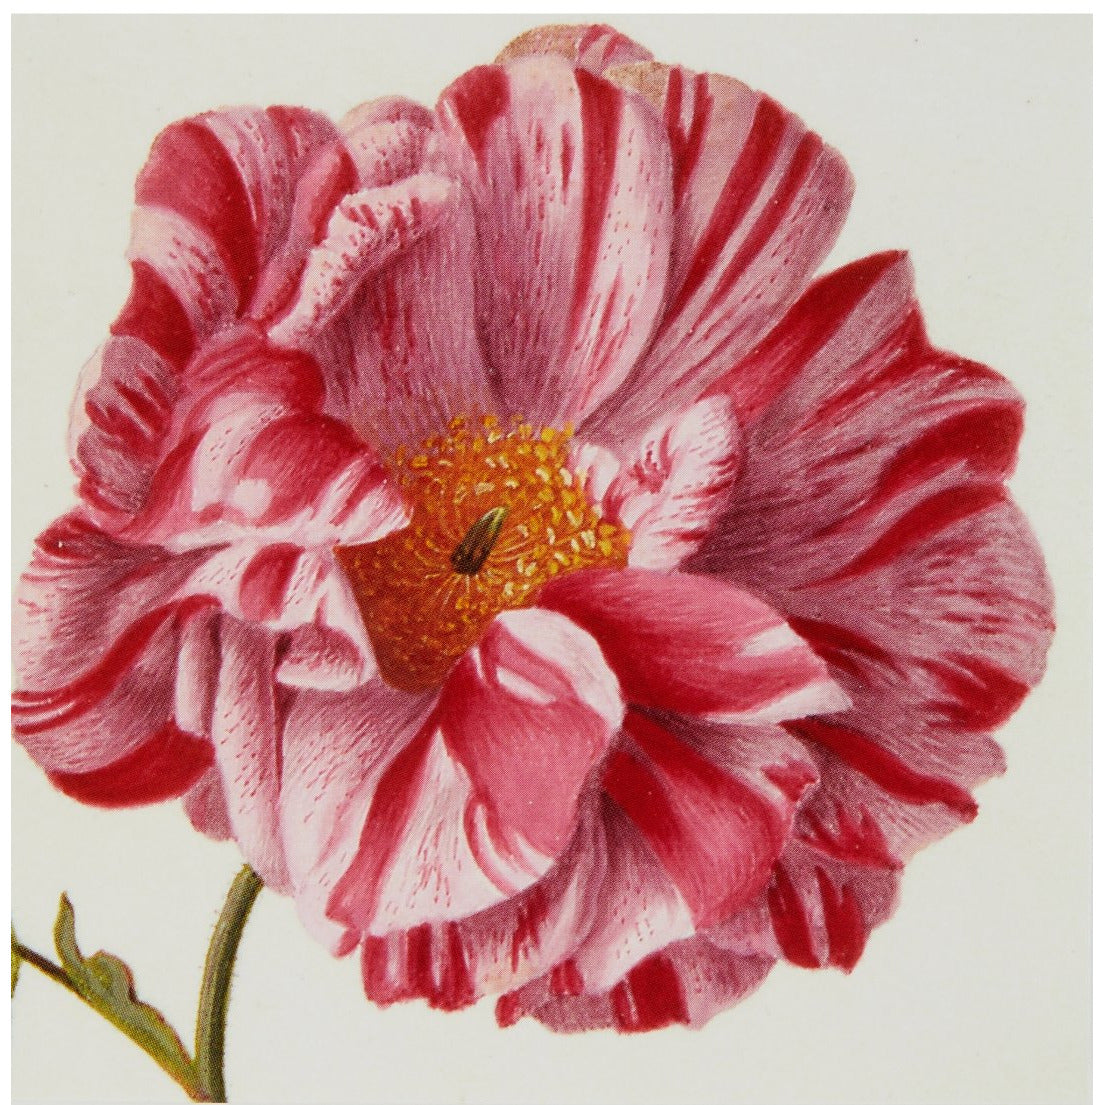 Notecard - Provins rose, attributed to Pieter Withoos. From the Broughton collection of the Fitzwilliam Museum, brought to you by CuratingCambridge.co.uk